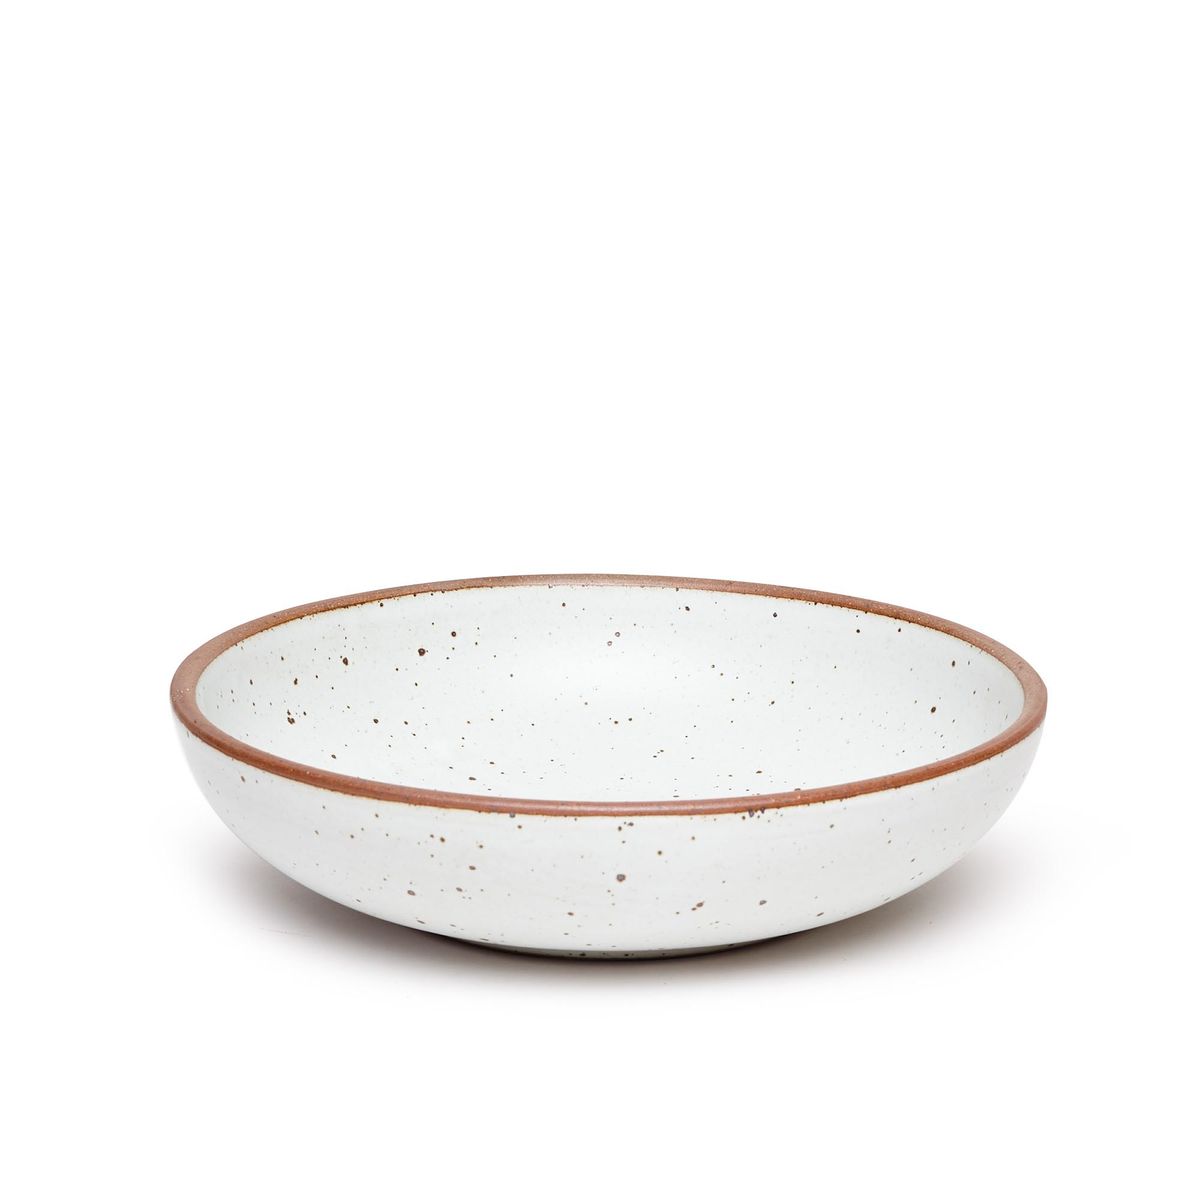 A large shallow serving ceramic bowl in a cool white color featuring iron speckles and an unglazed rim